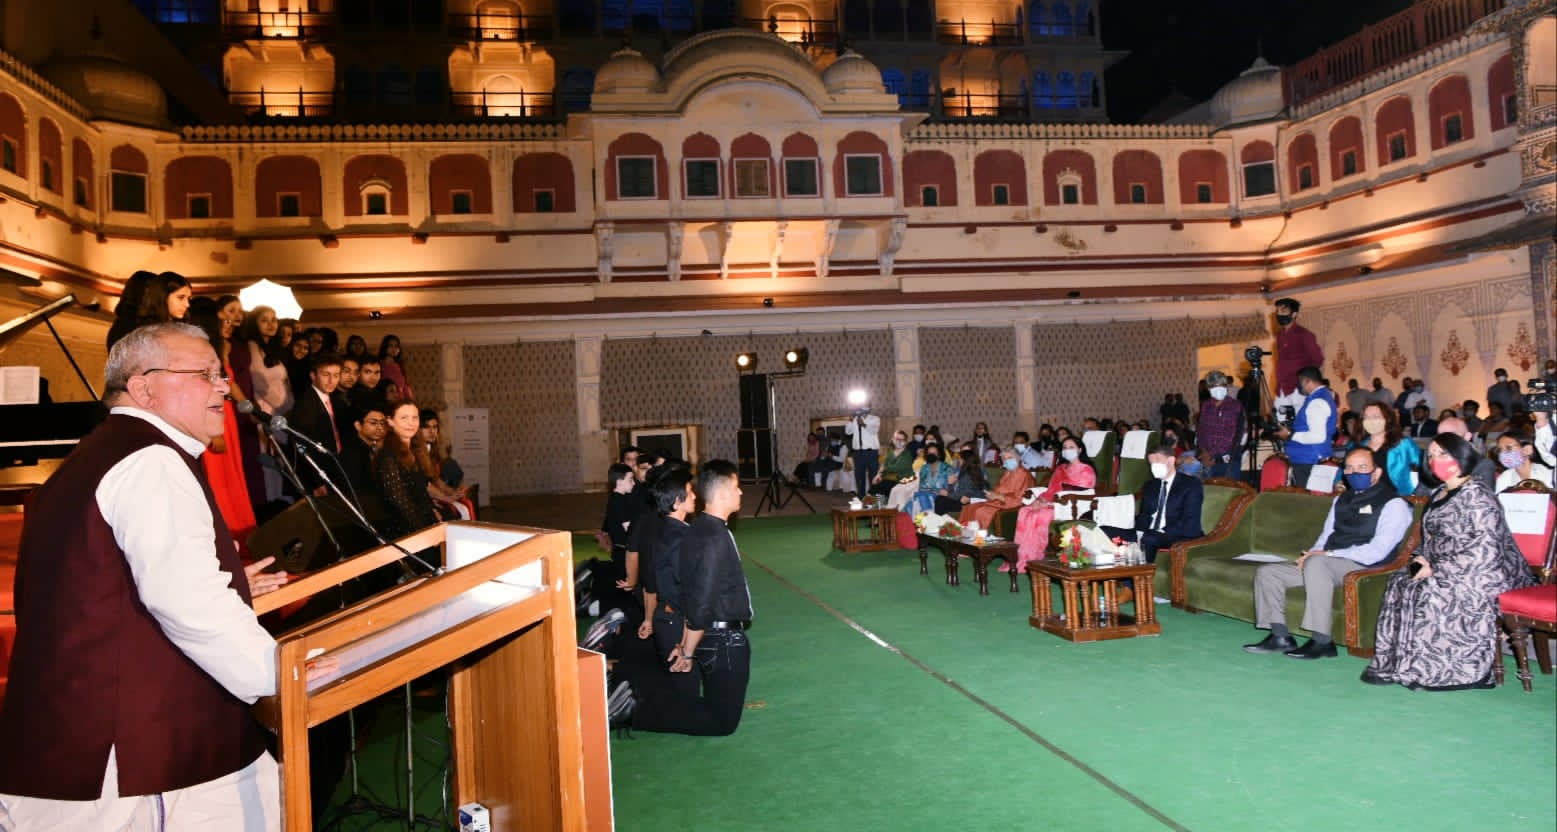 Hon'ble Governor witnessed an opera performance at The Palace School